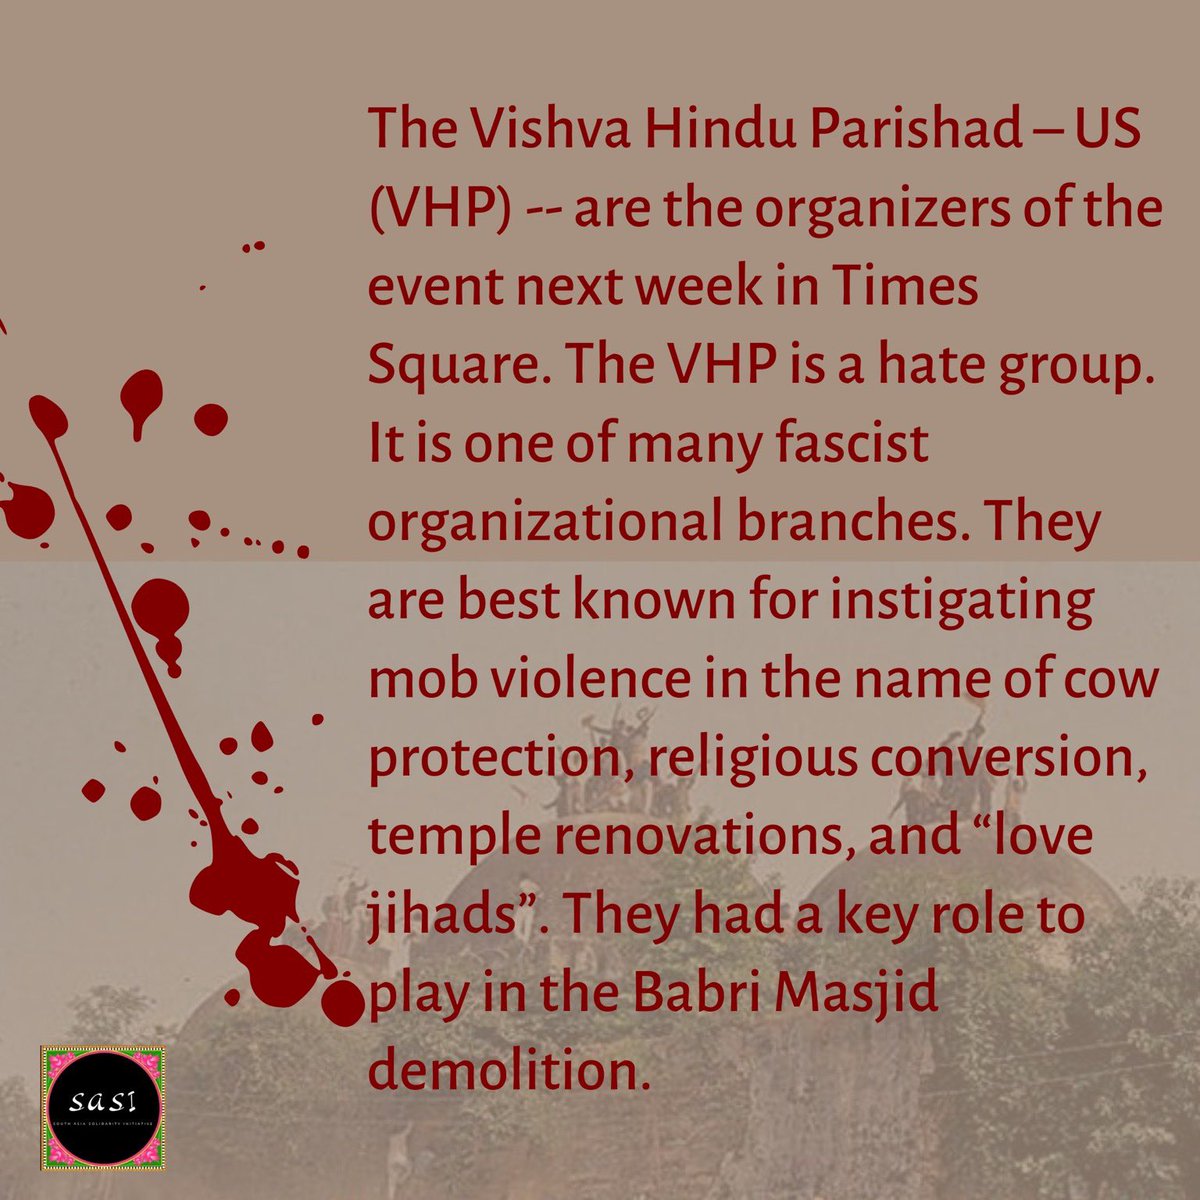 On the Vishwa Hindu Parishad, its role in the Babri Masjid demolition and killings, and its direct link to Modi who himself has orchestrated multiple massacres. The diaspora has always fueled this genocidal regime, but it’s time to turn the tide and say no to hindu nationalism!